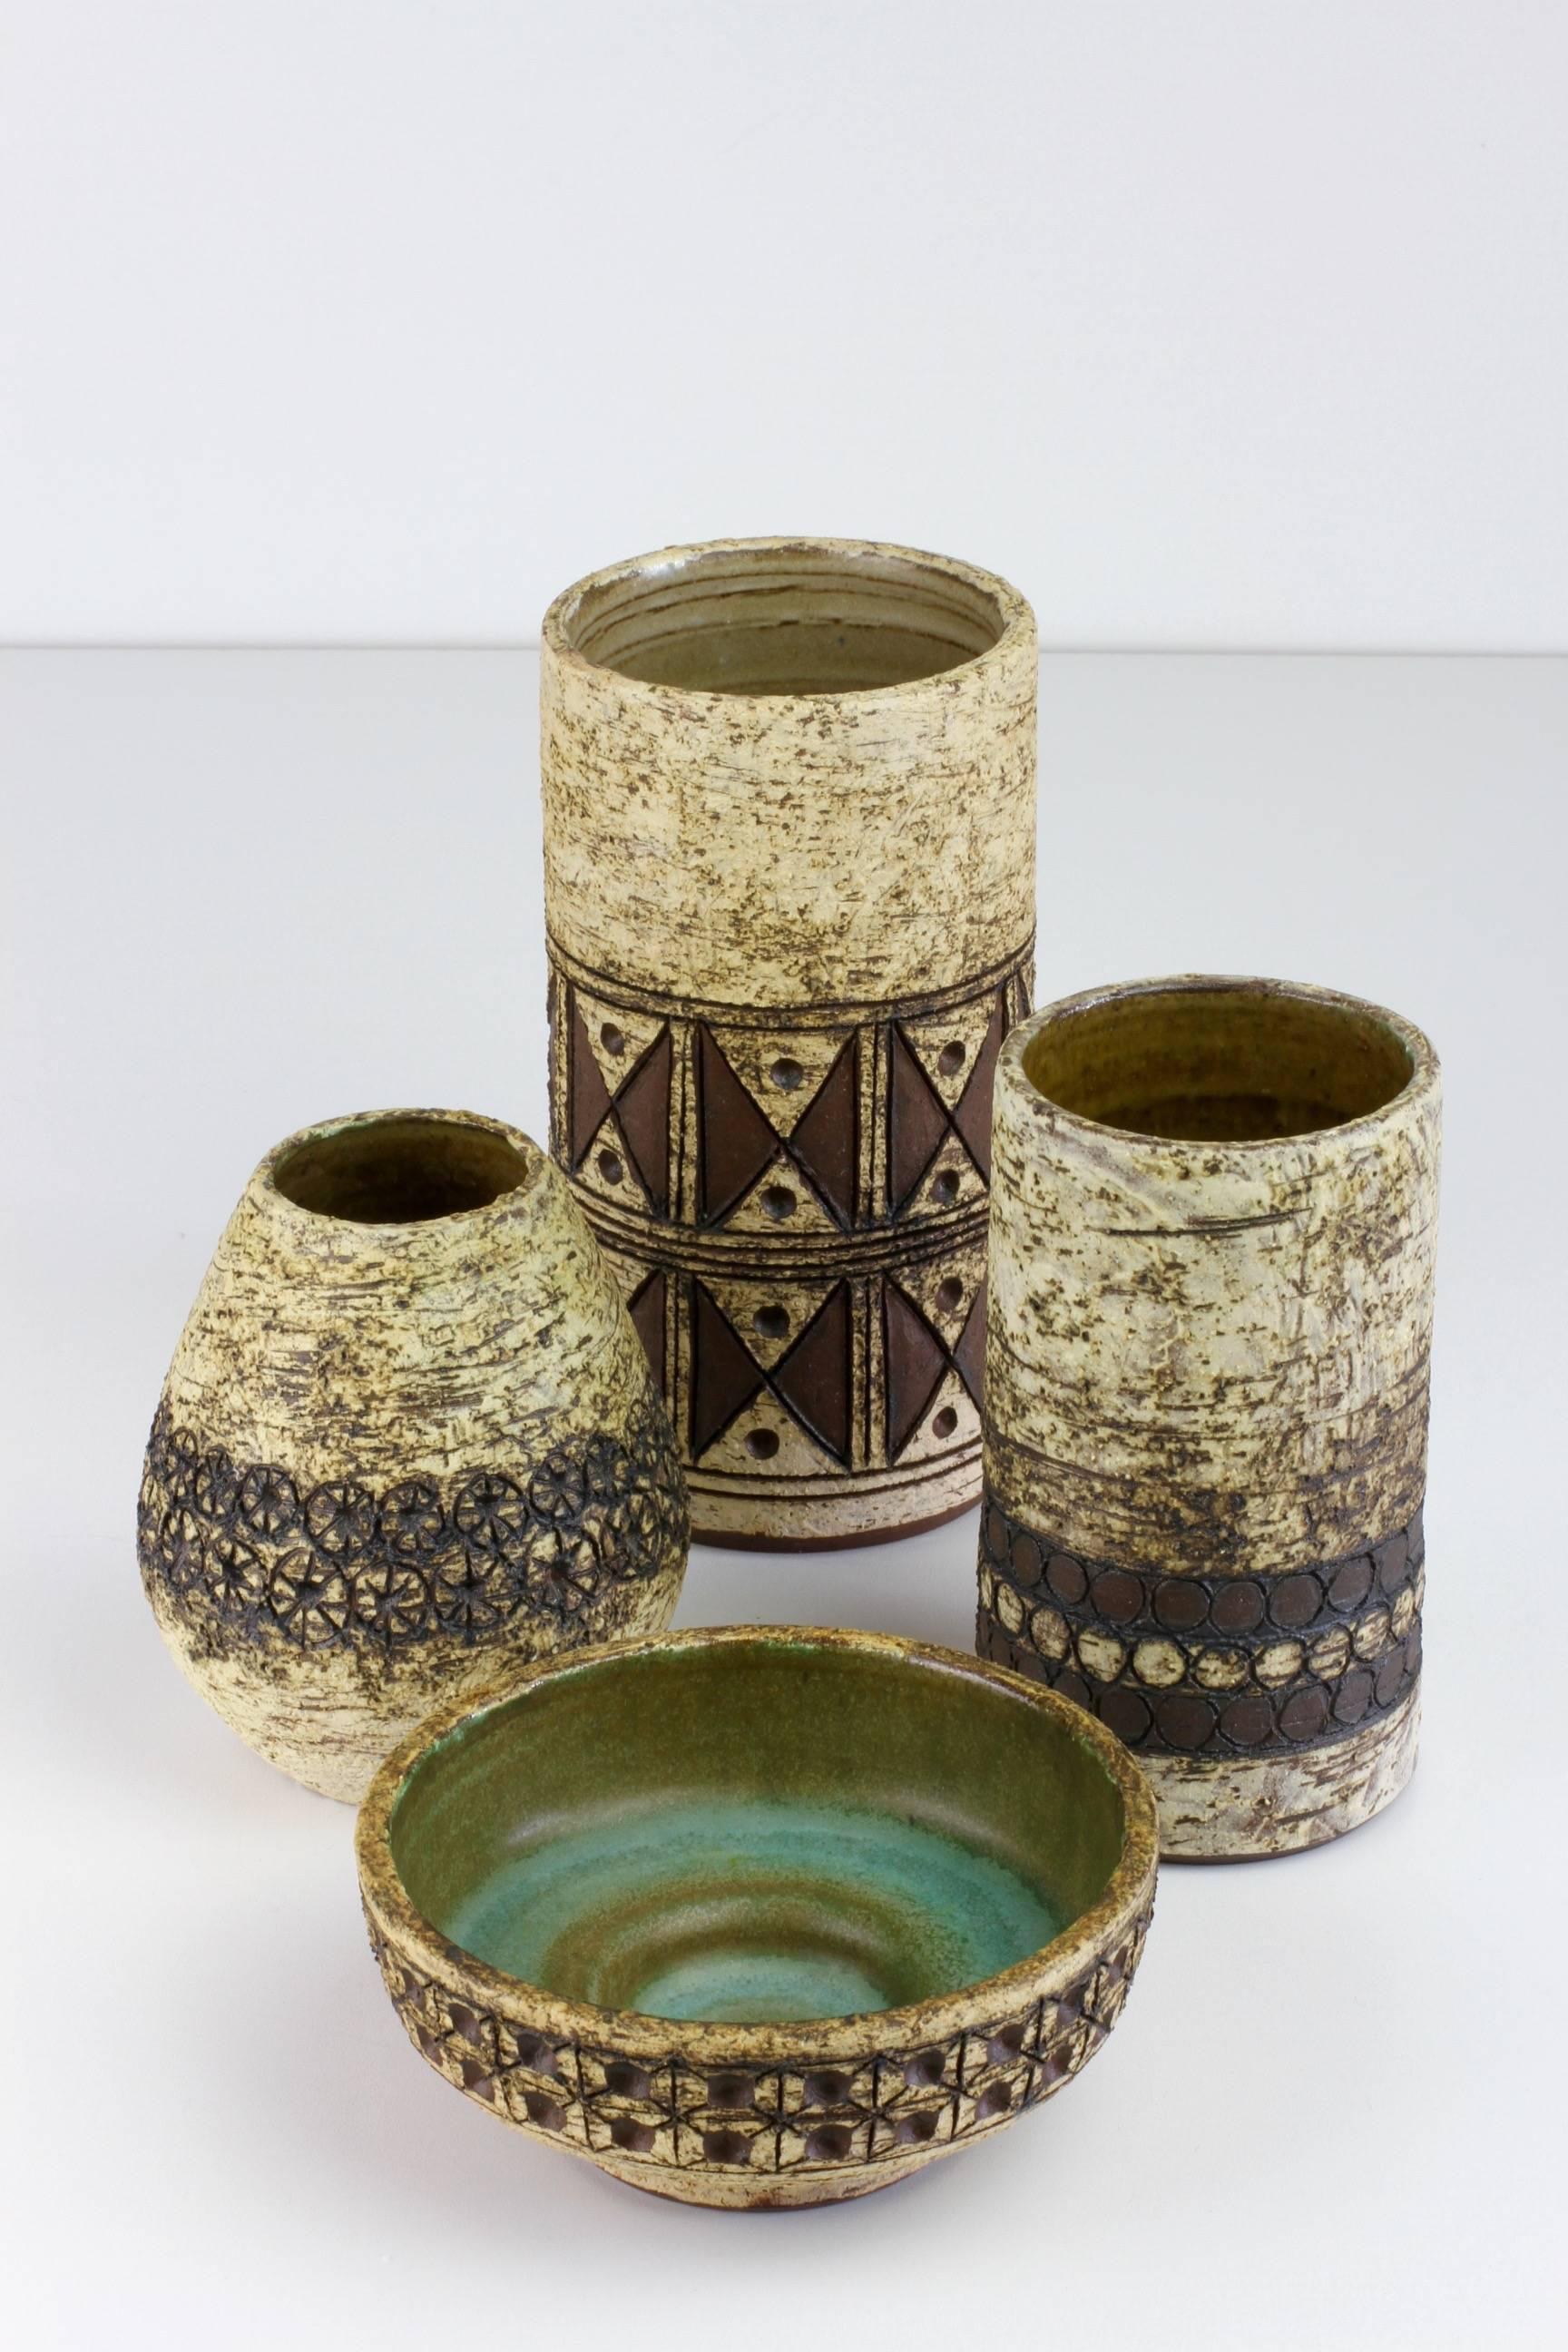 Absolutely stunning little collection of hand thrown, organically shaped and textured pottery including cylindrical vases, vessels and a bowl or dish. At first glance it is easy to mistake these works as Danish in origin but, they are by German born